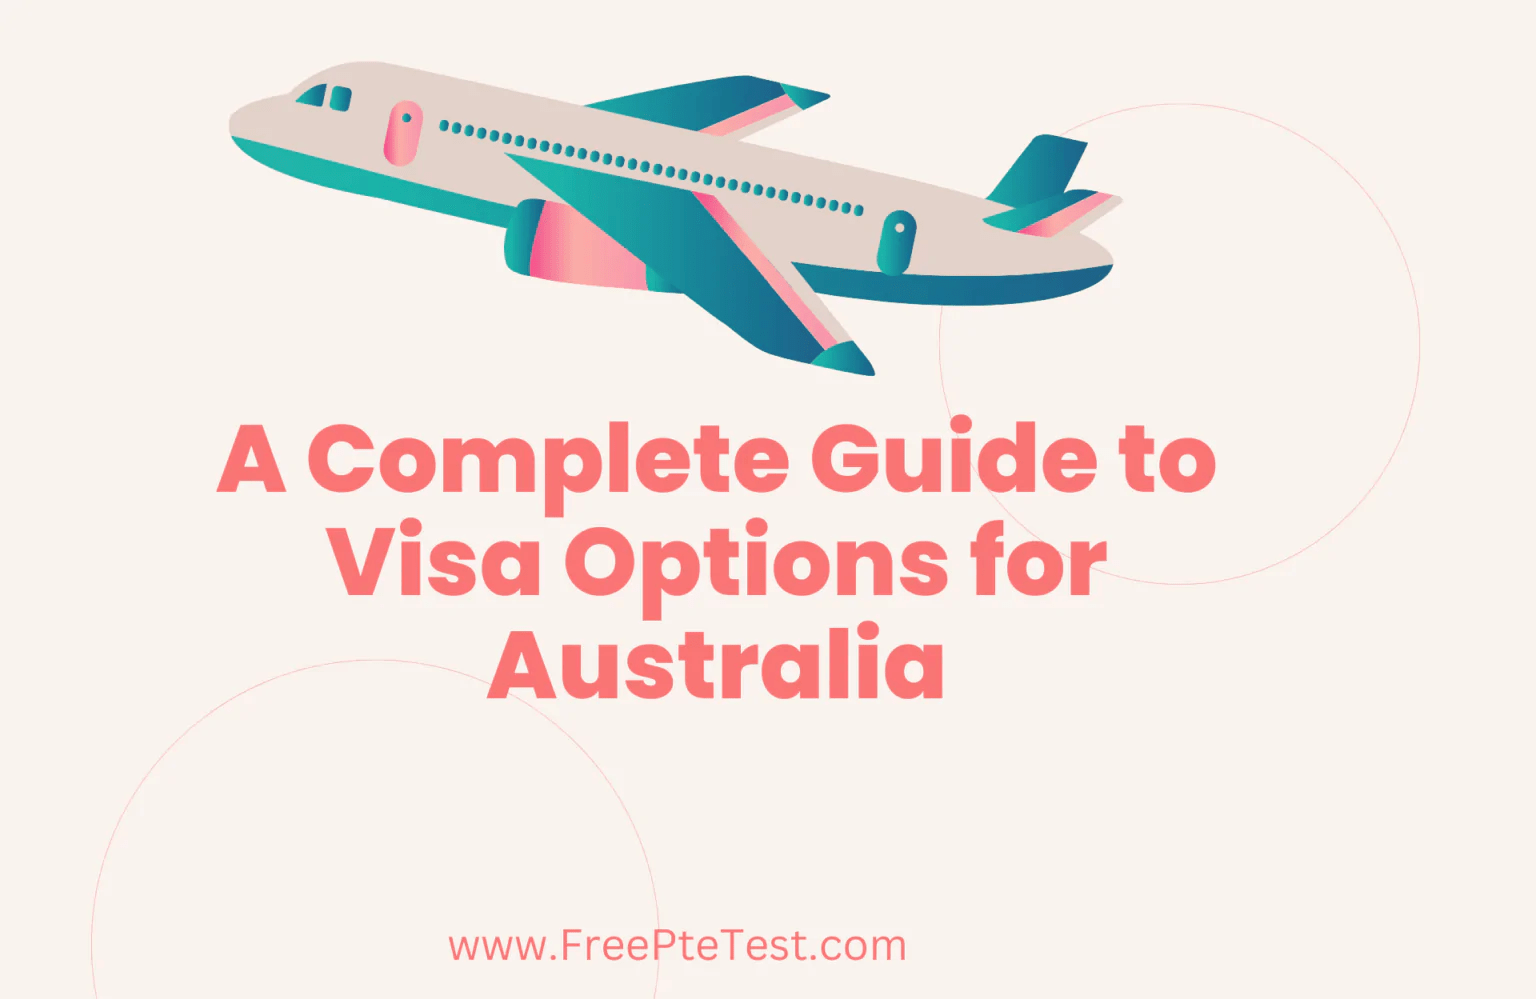 A Complete Guide to Visa Options for Australia